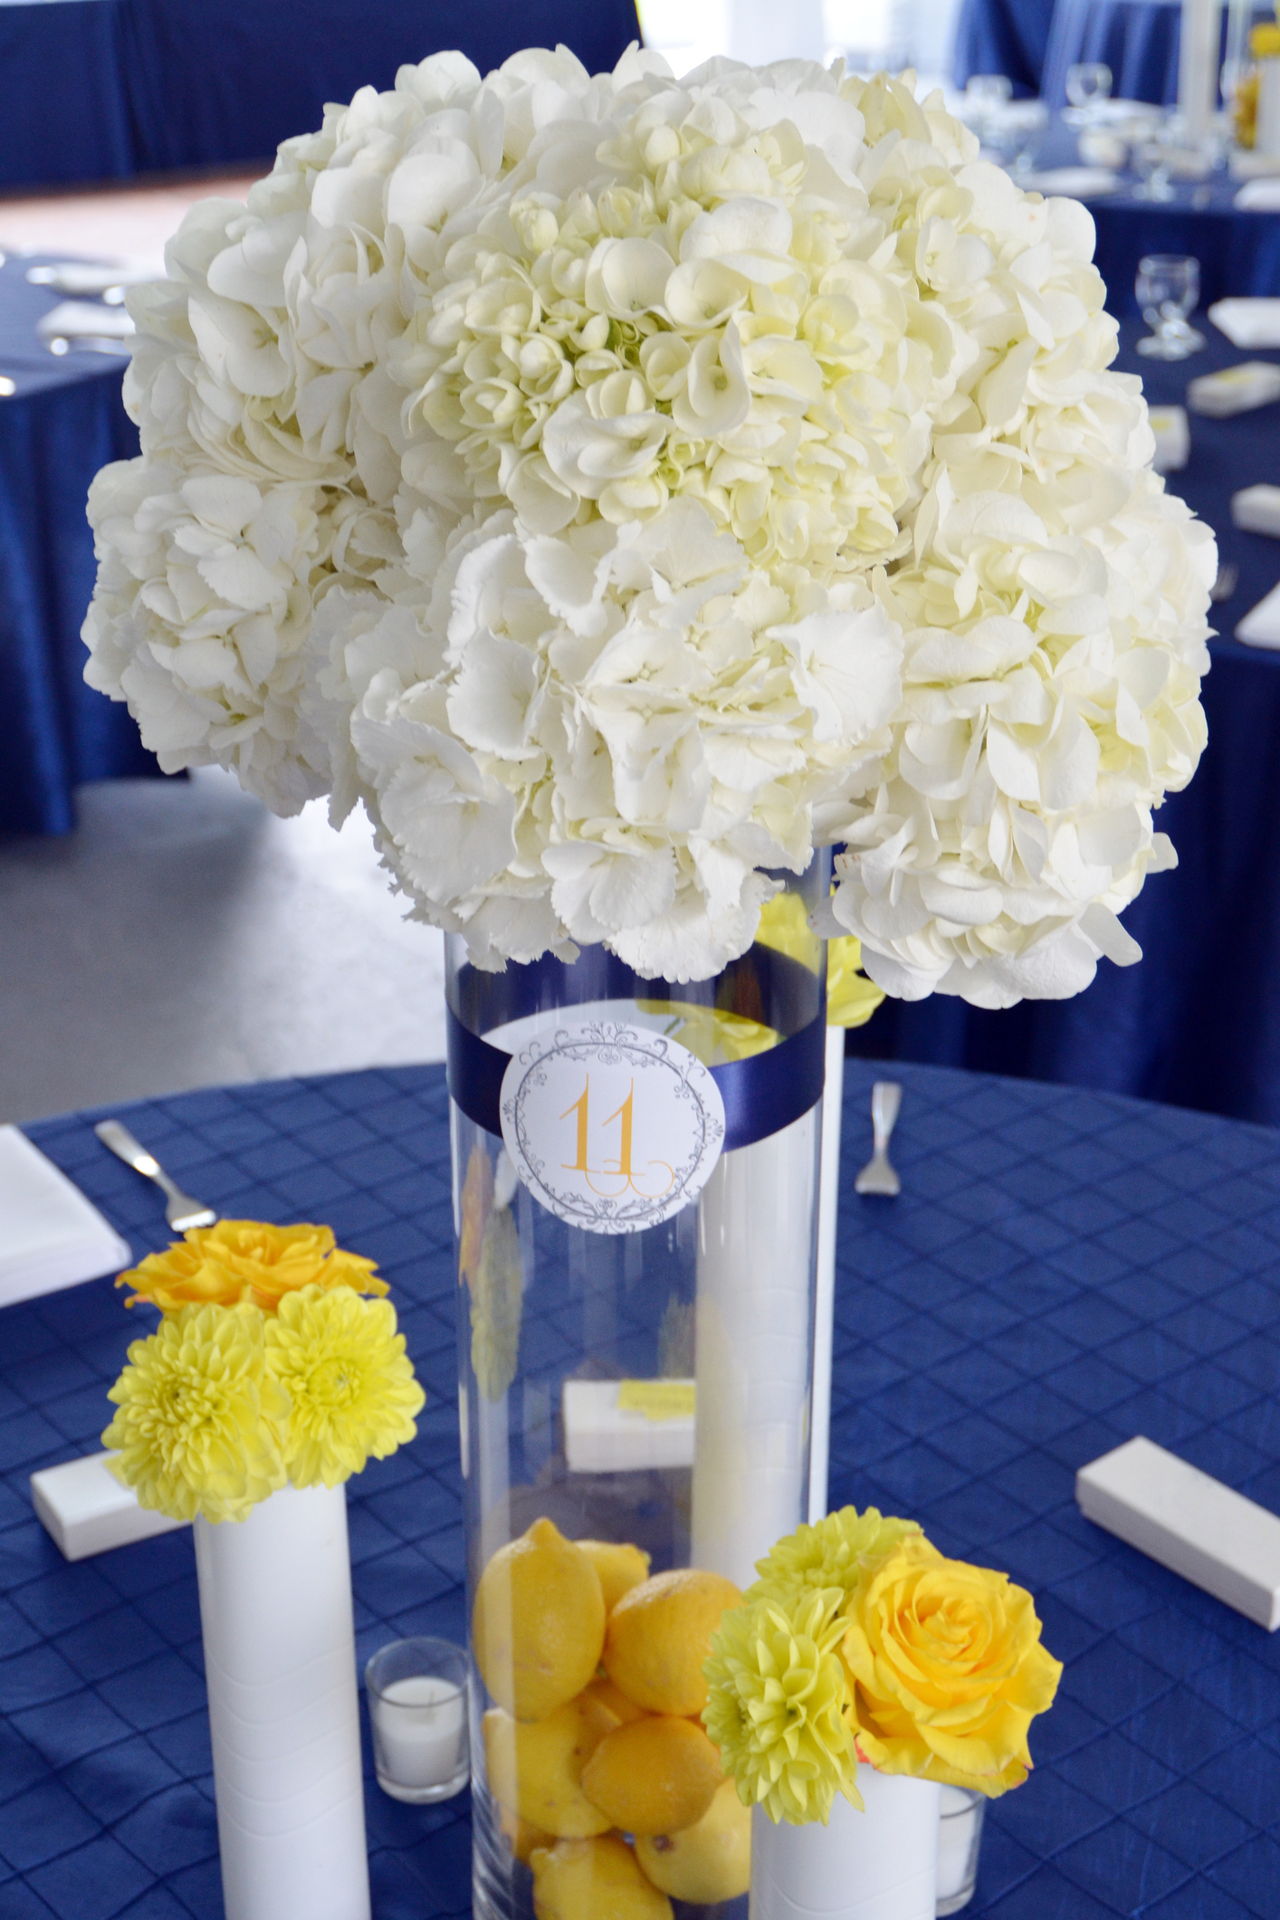 Eye-catching Centerpieces to Enhance the Retirement Party Decor1280 x 1920